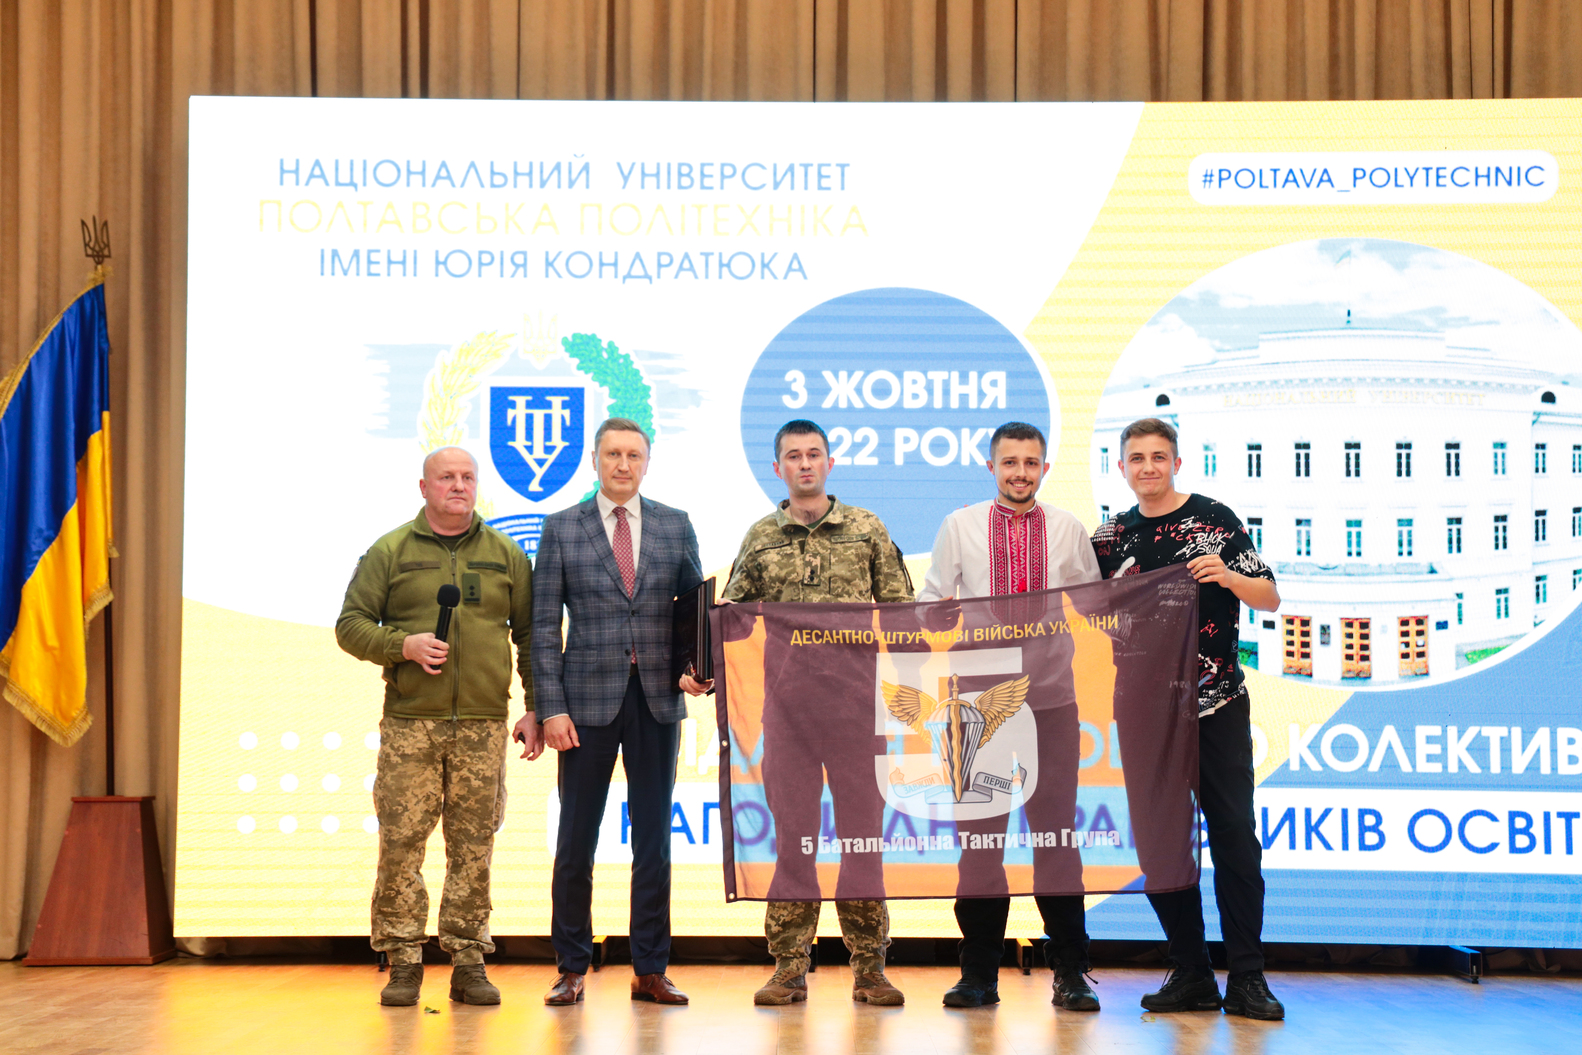 Defenders praise Polytechnic team for their contribution to Ukraine’s victory